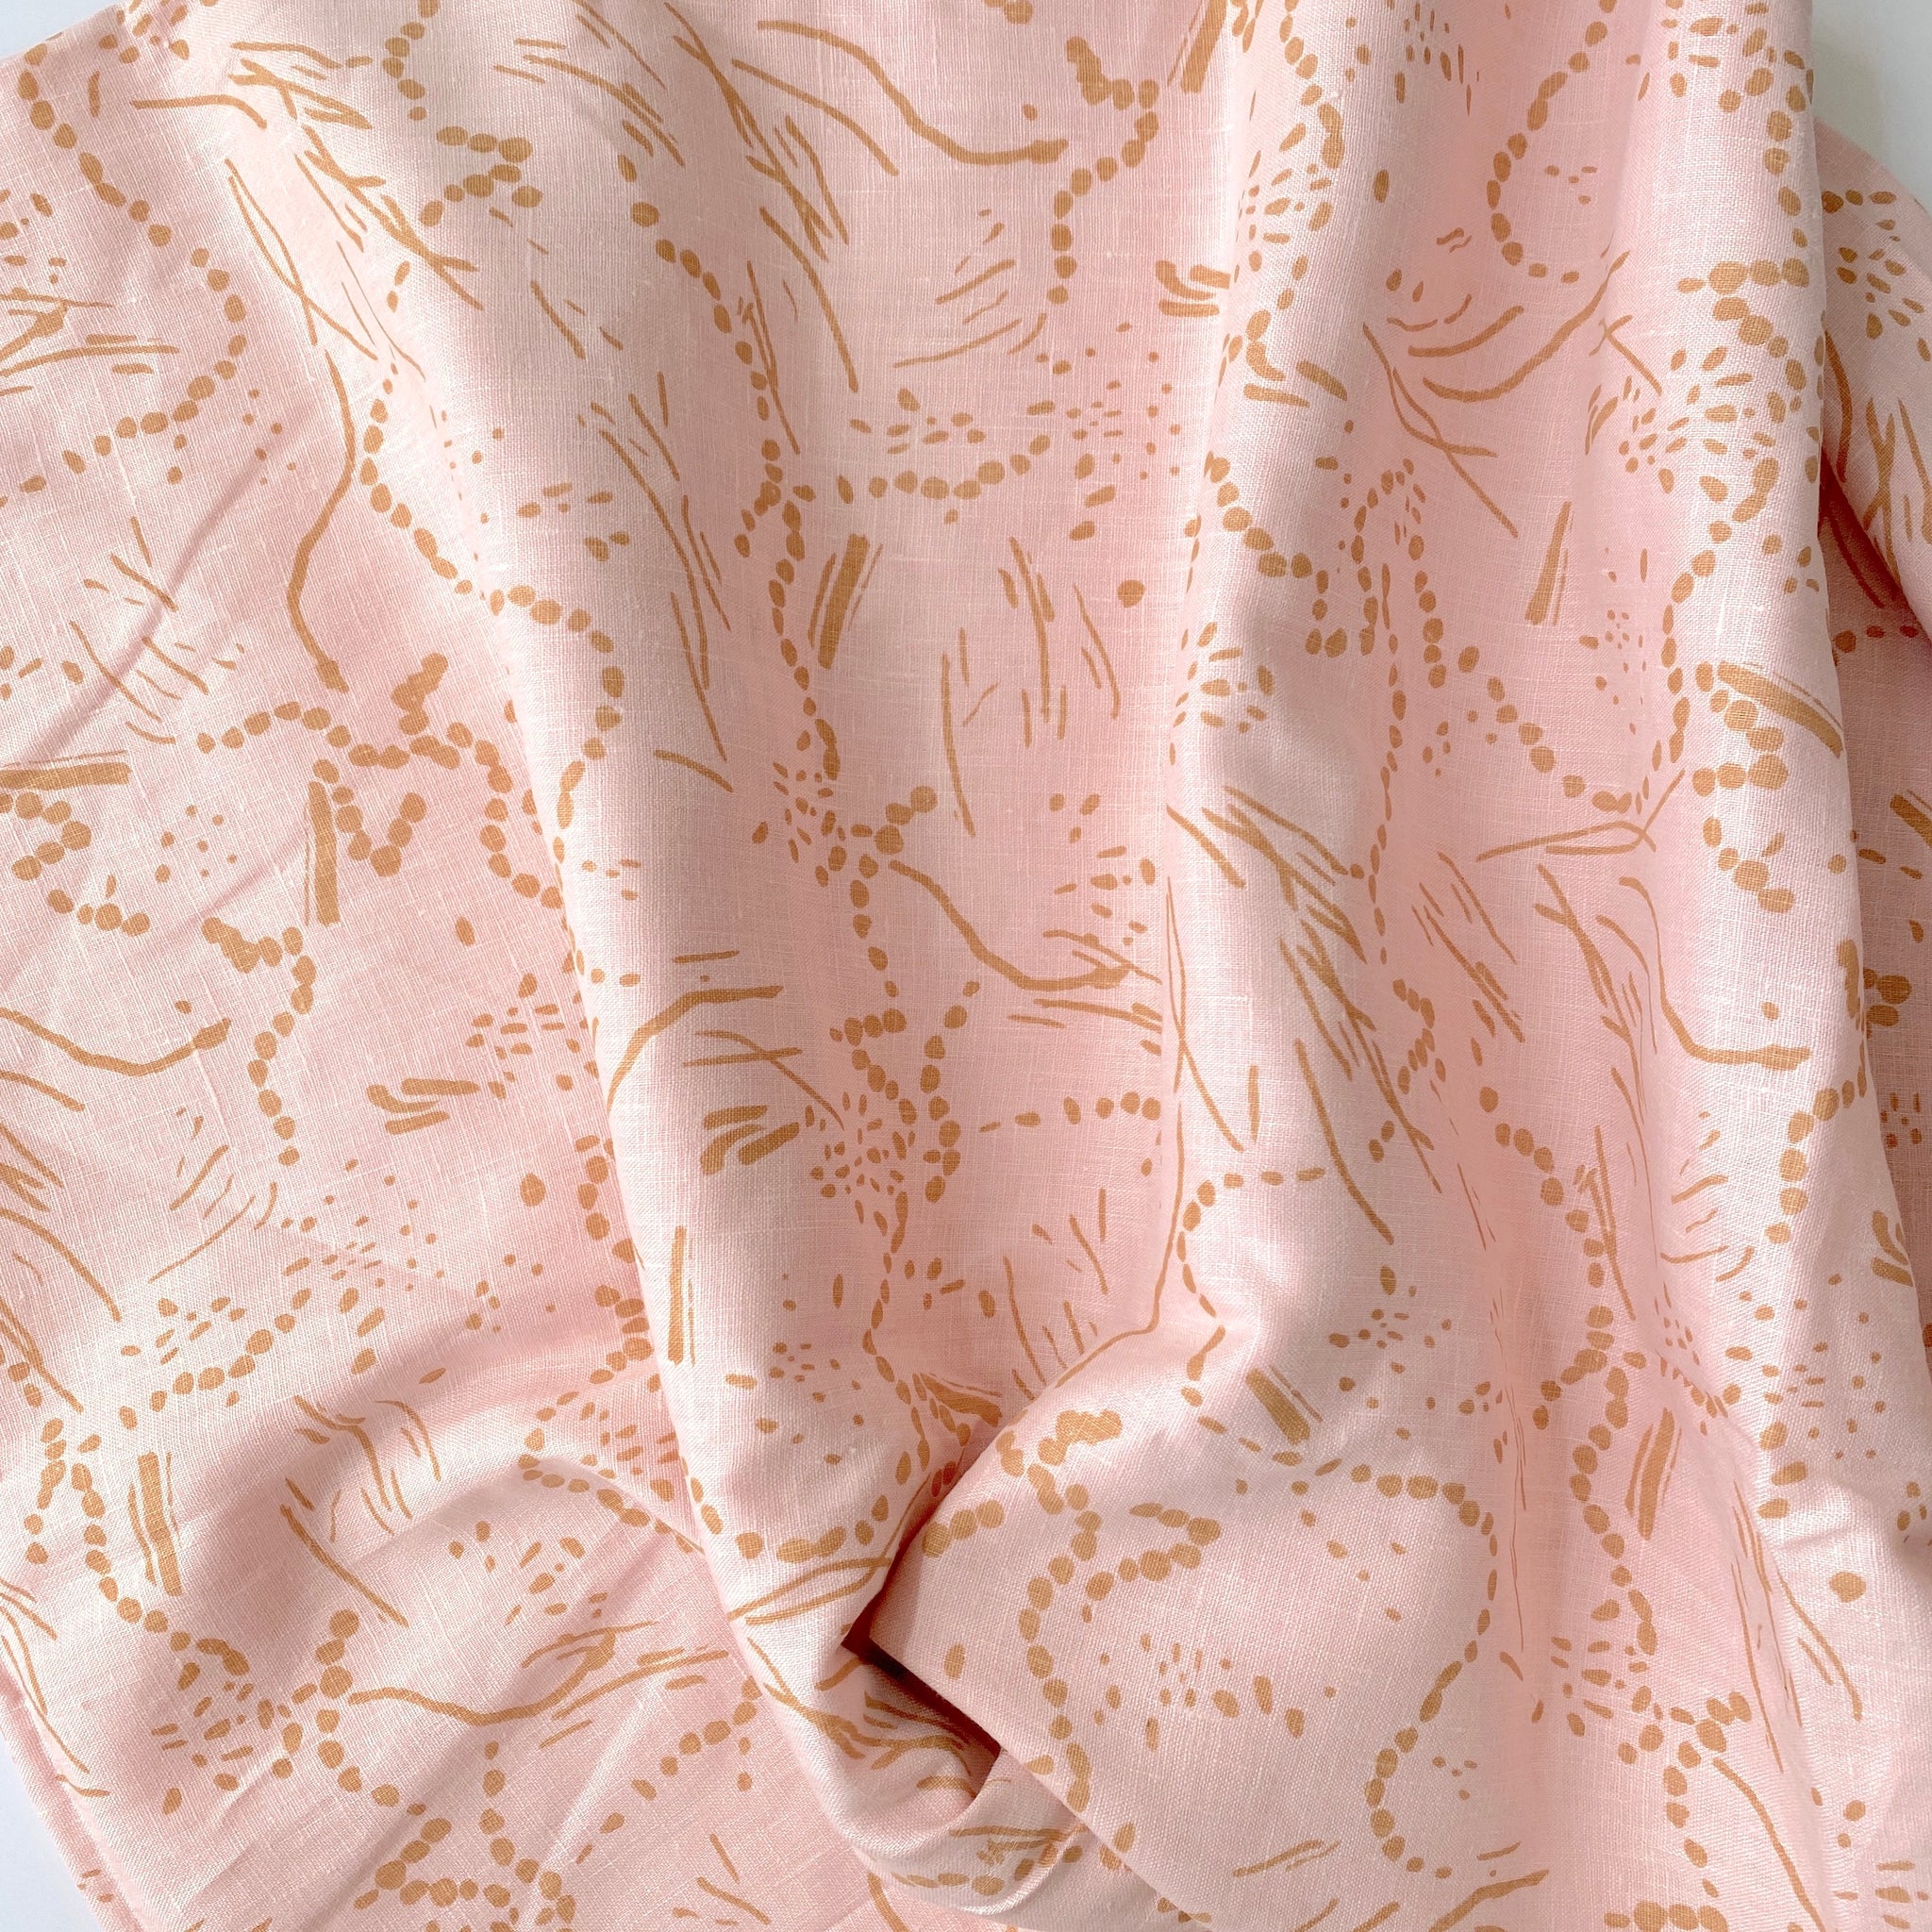 Drape in Gold on Dusty Pink - 100% linen - FABRIC BY THE YARD